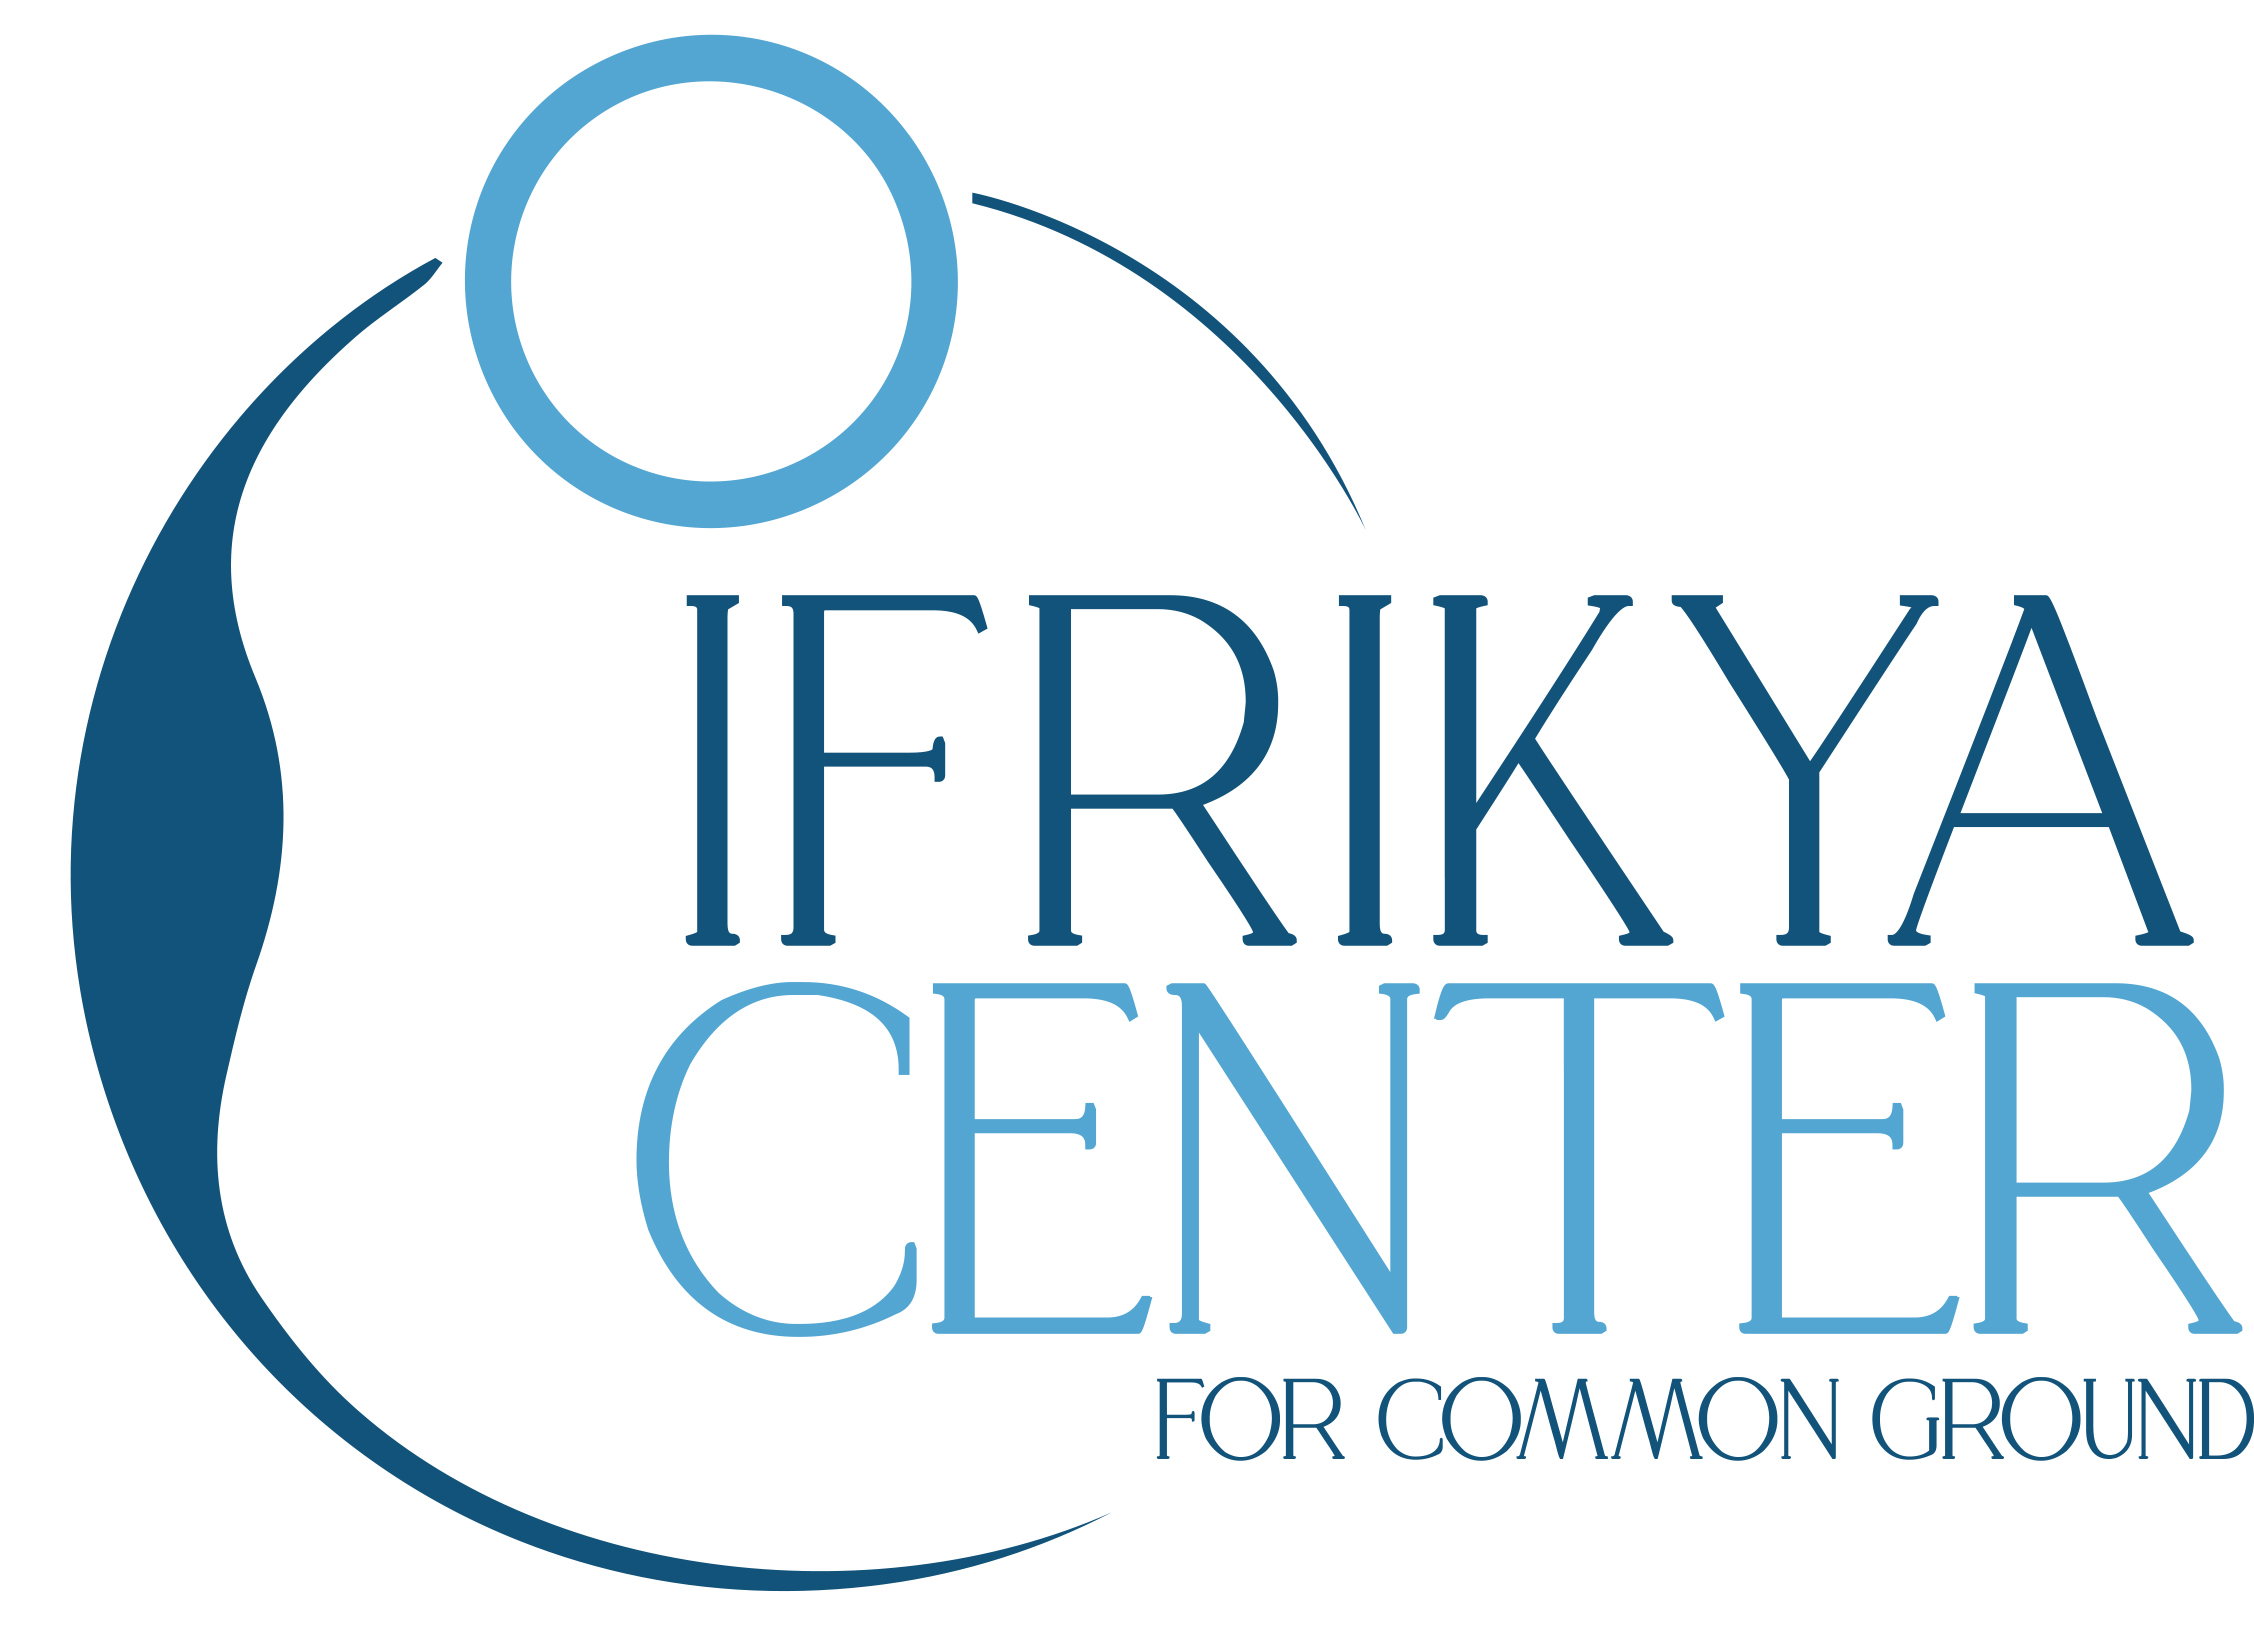 IFRIKYA CENTER FOR COMMON GROUND